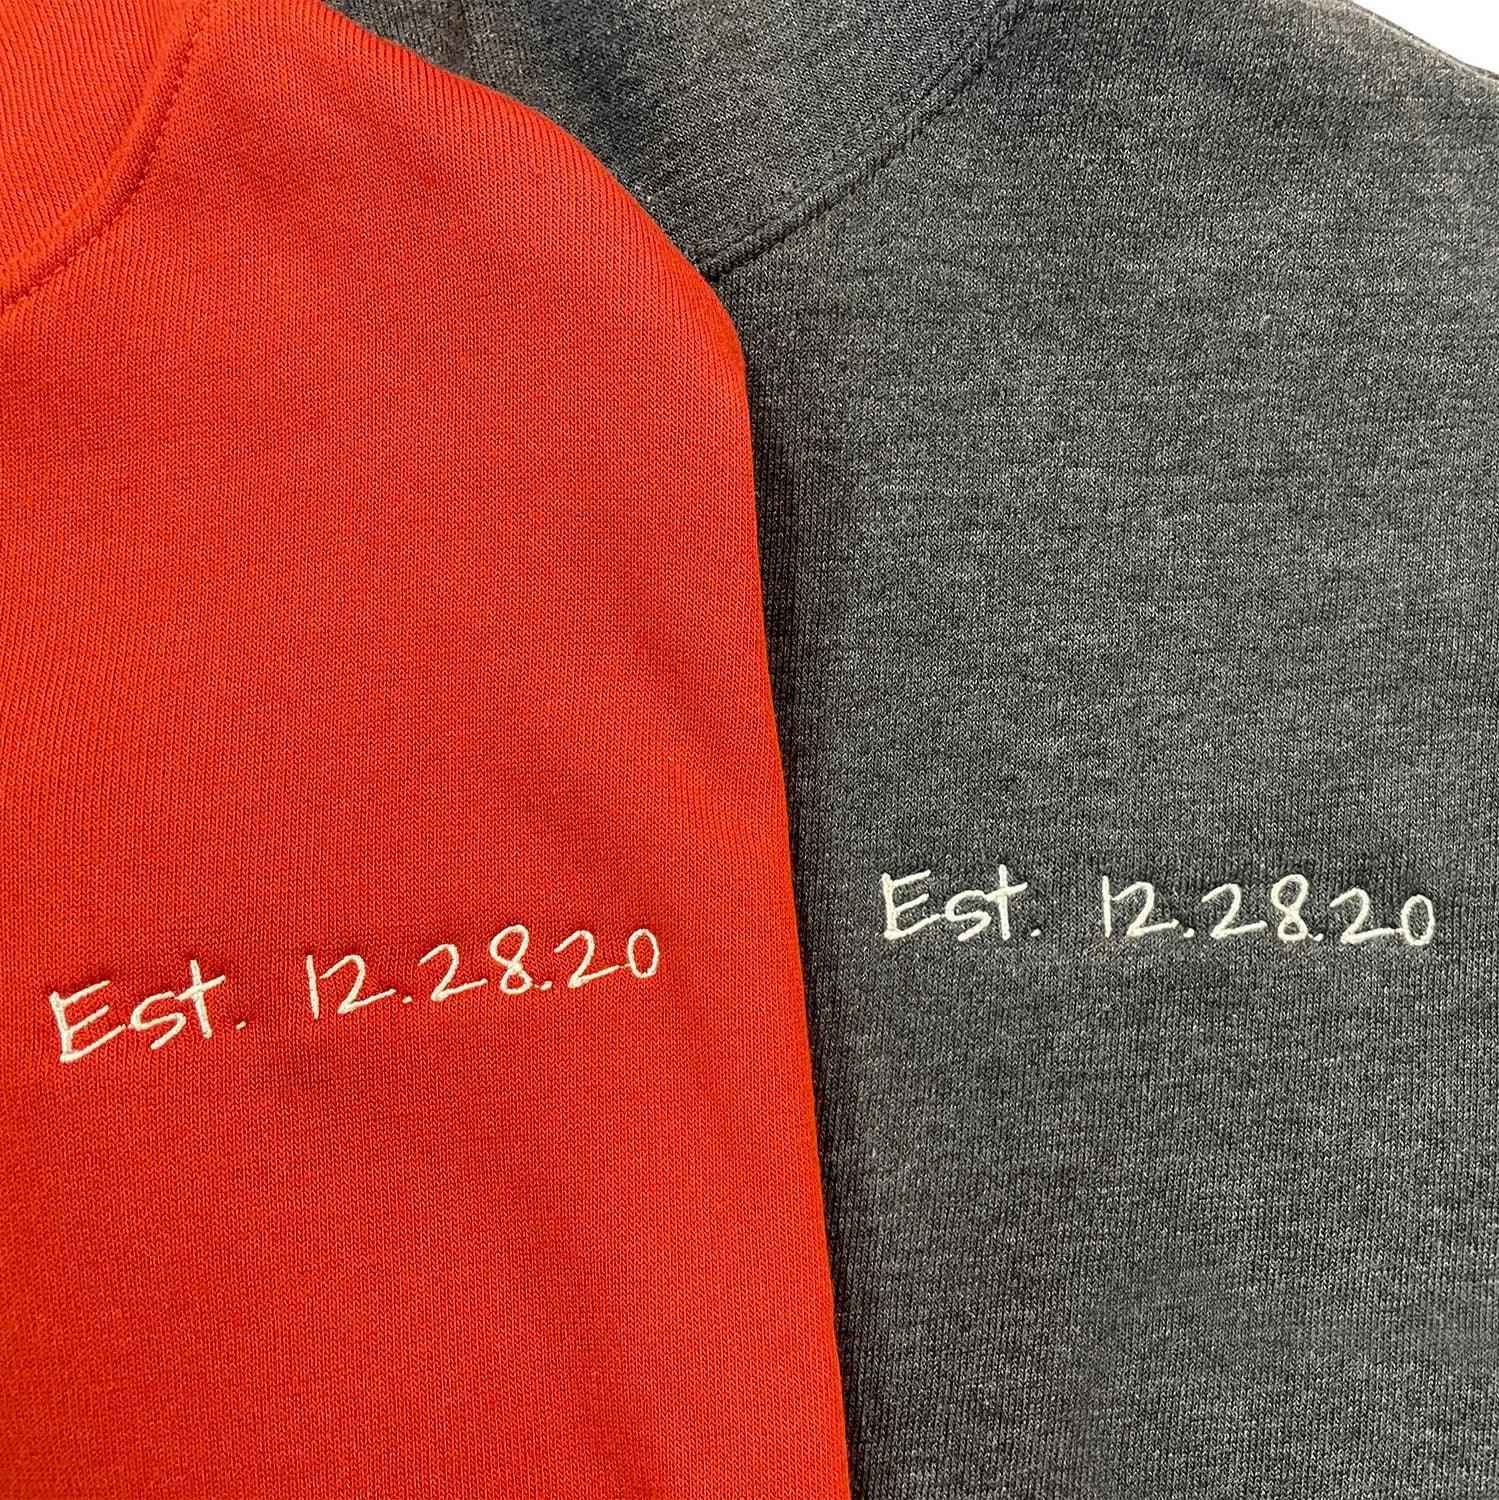 Custom Embroidered Matching Couple Hoodies with Your Initials & Anniversary Date